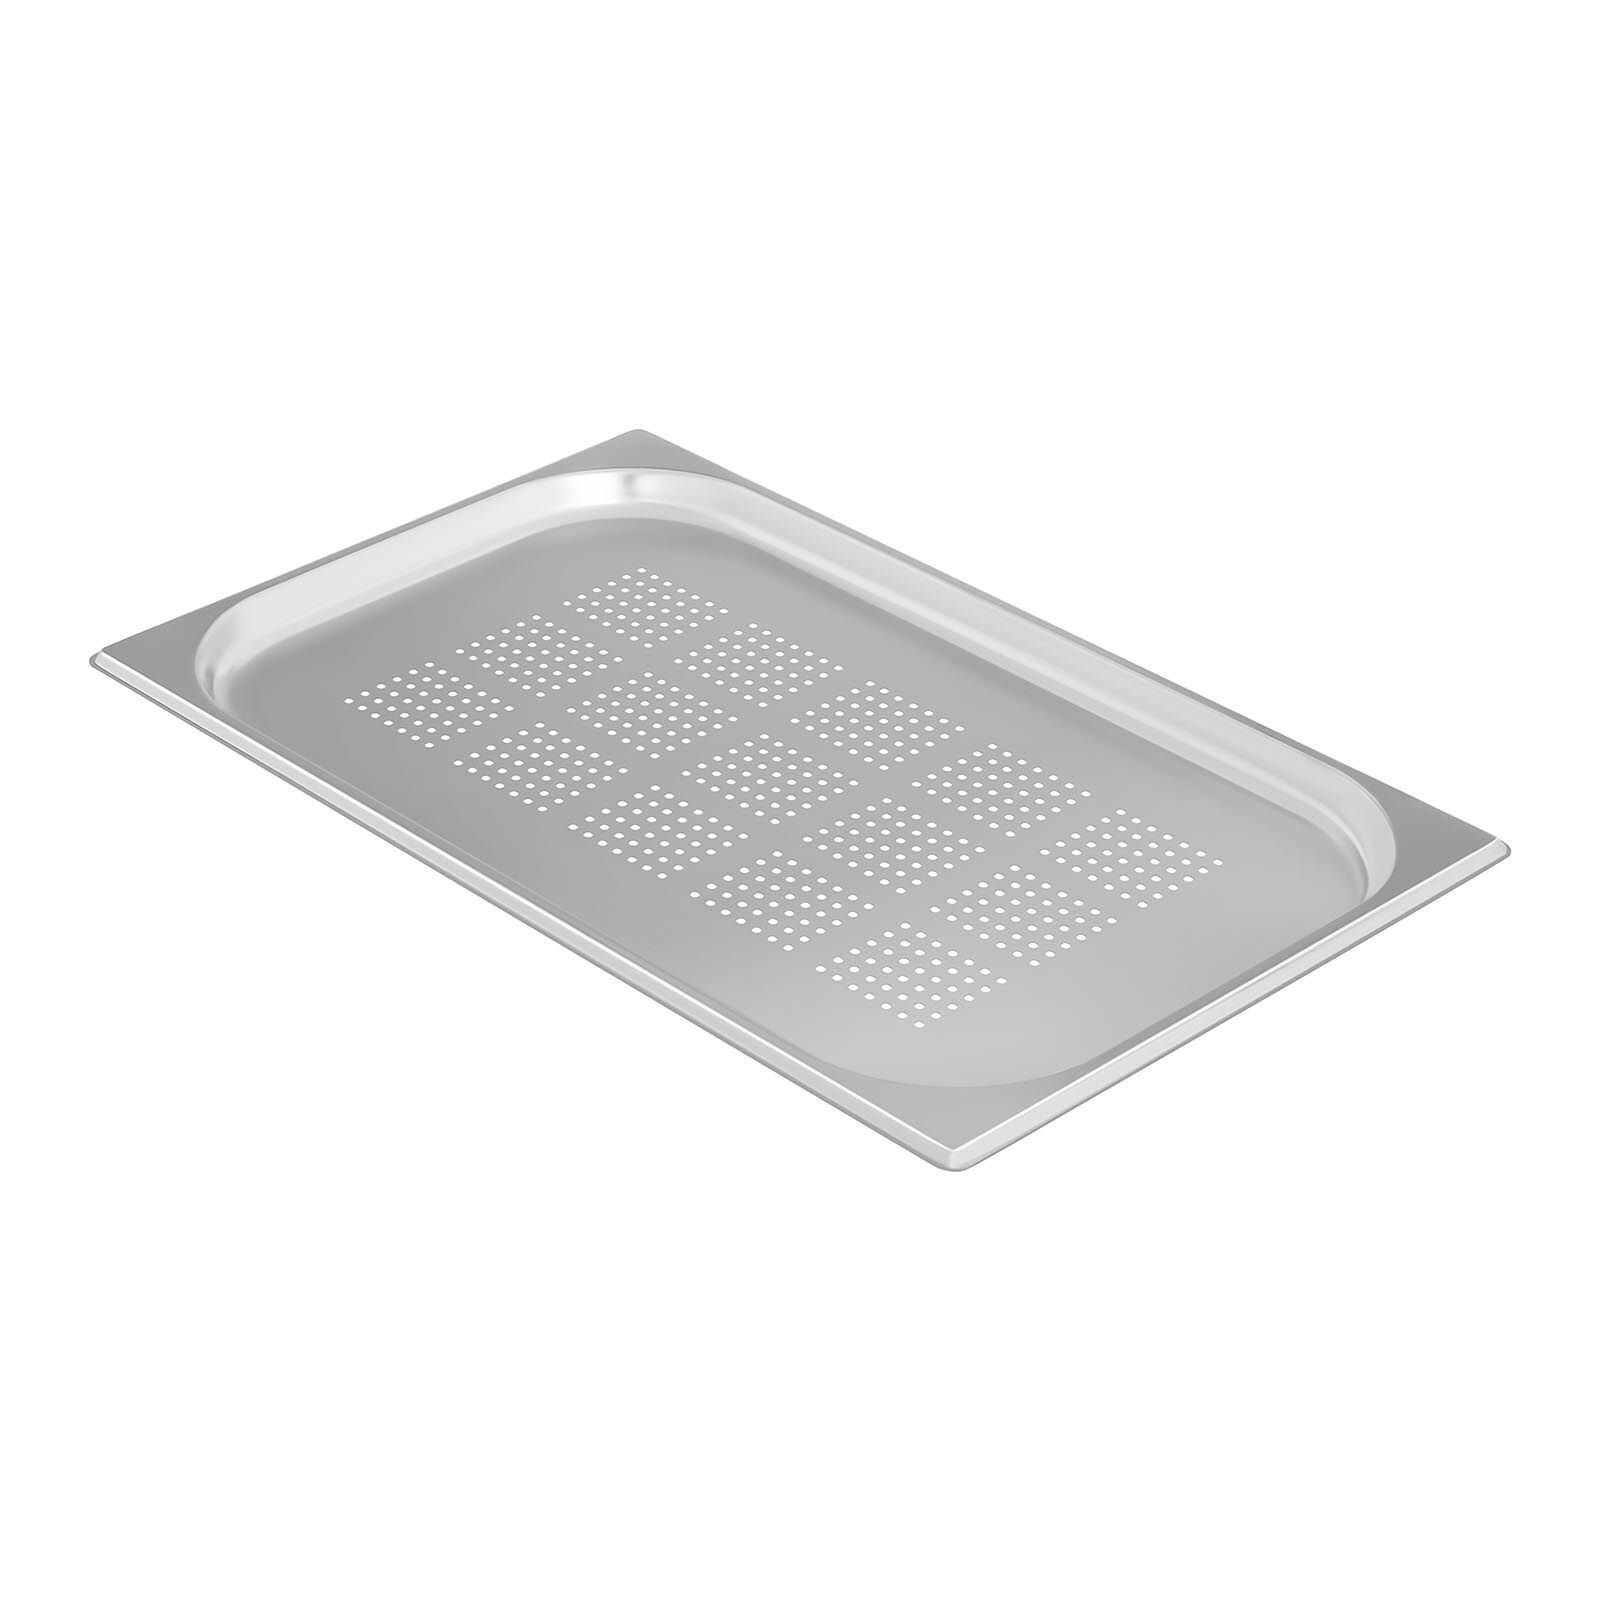 Royal Catering Gastronorm Tray - 1/1 - 20 mm - Perforated